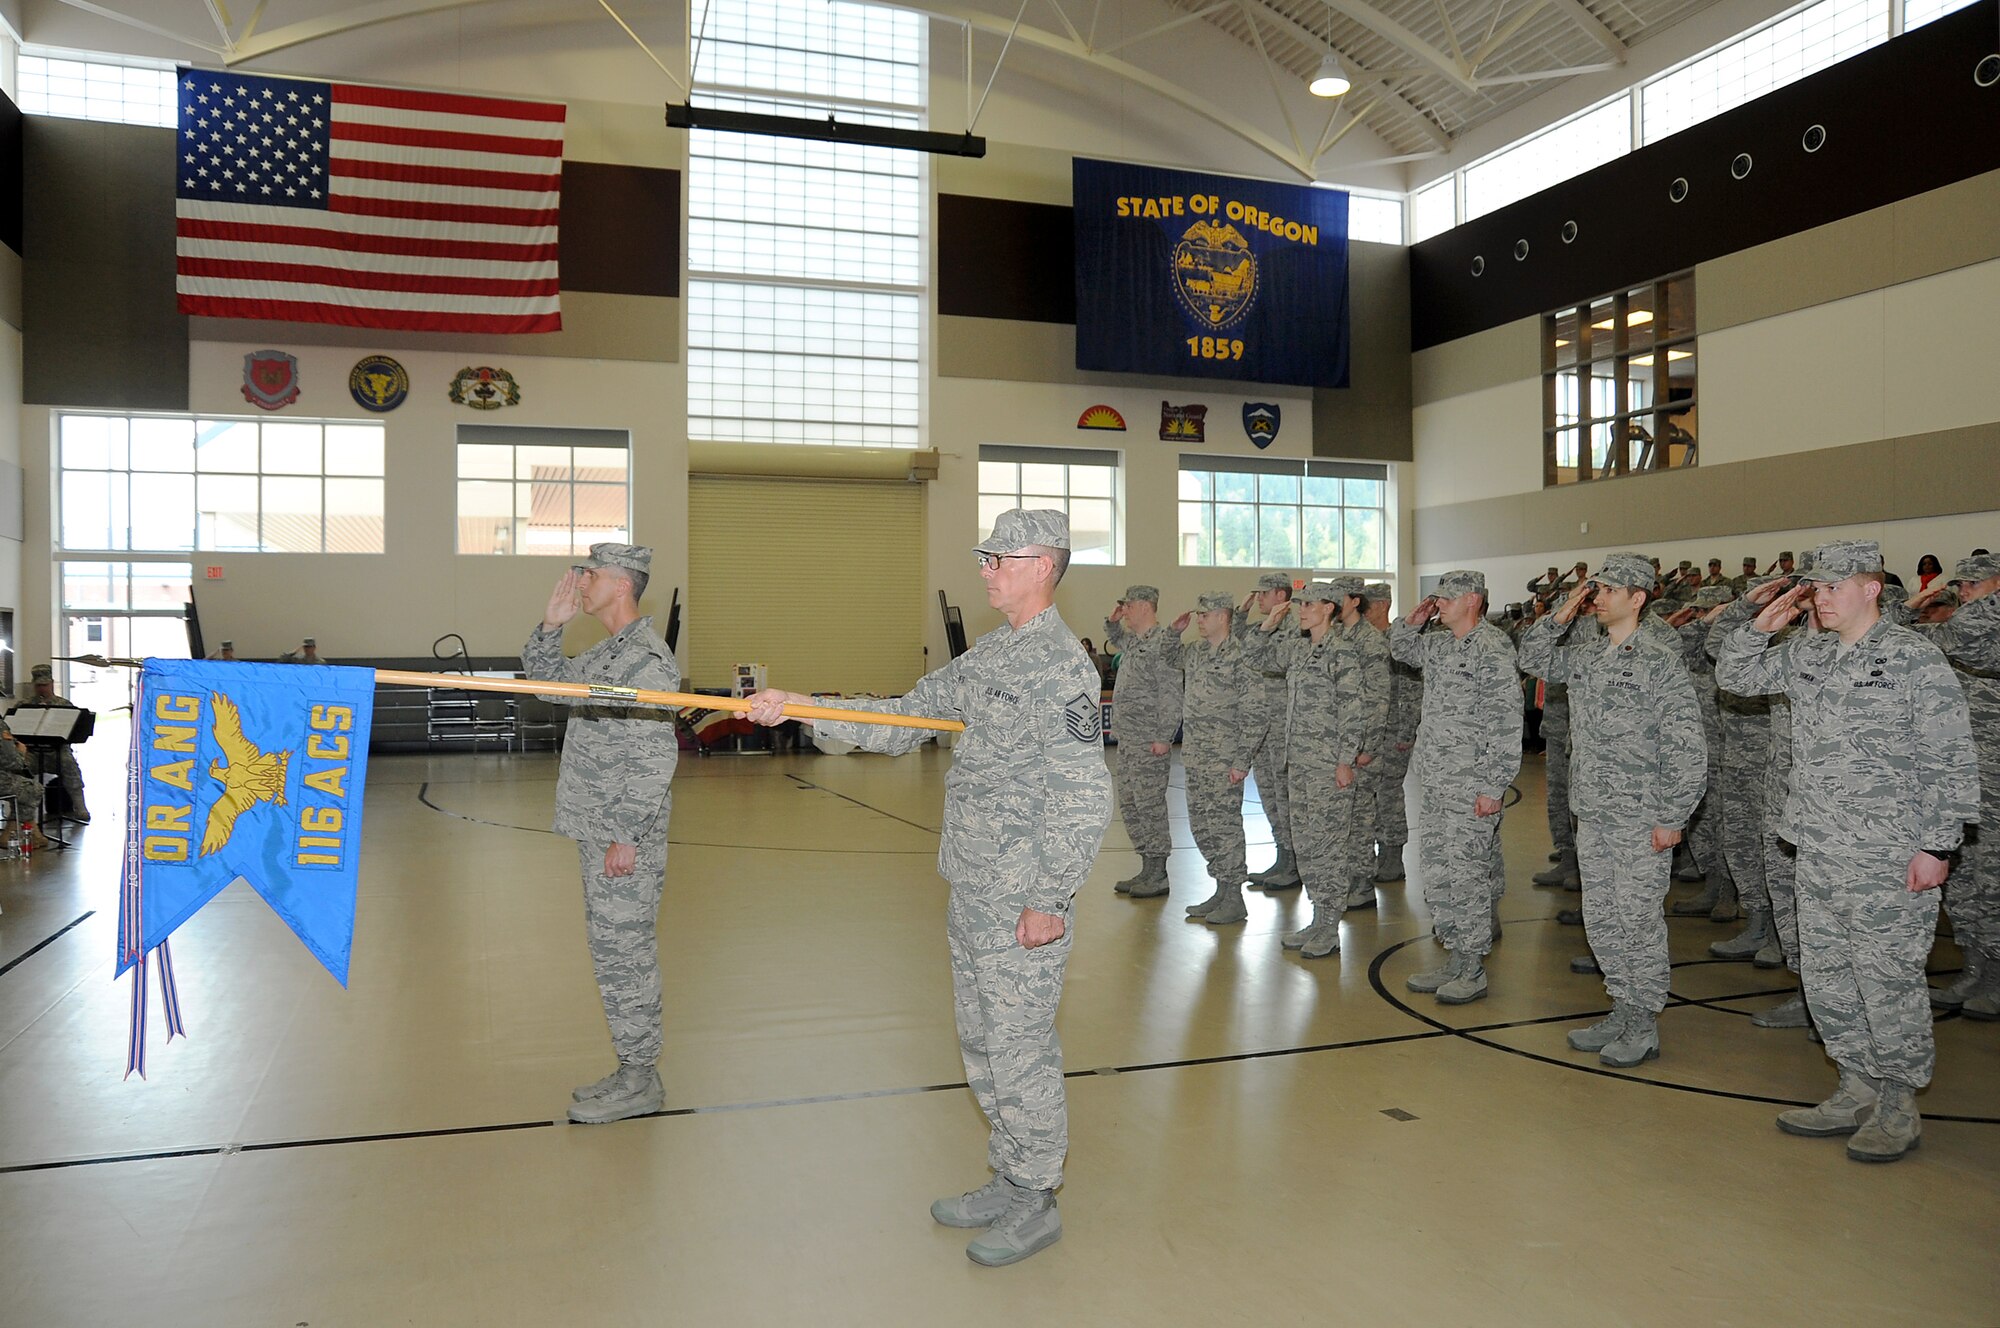 Members of the 116th Air Control Squadron, Oregon Air National Guard, are honored during a mobilization ceremony held at Camp Withycombe, in Clackamas, Ore., April 11, 2015. The 116th ACS, is tasked with a tactical control mission and reporting center, and is part of the Oregon Air National Guard Combat Operations Group. (U.S. Air National Guard Photo by Tech. Sgt. Emily Thompson, 142nd Fighter Wing Public Affairs/Released)